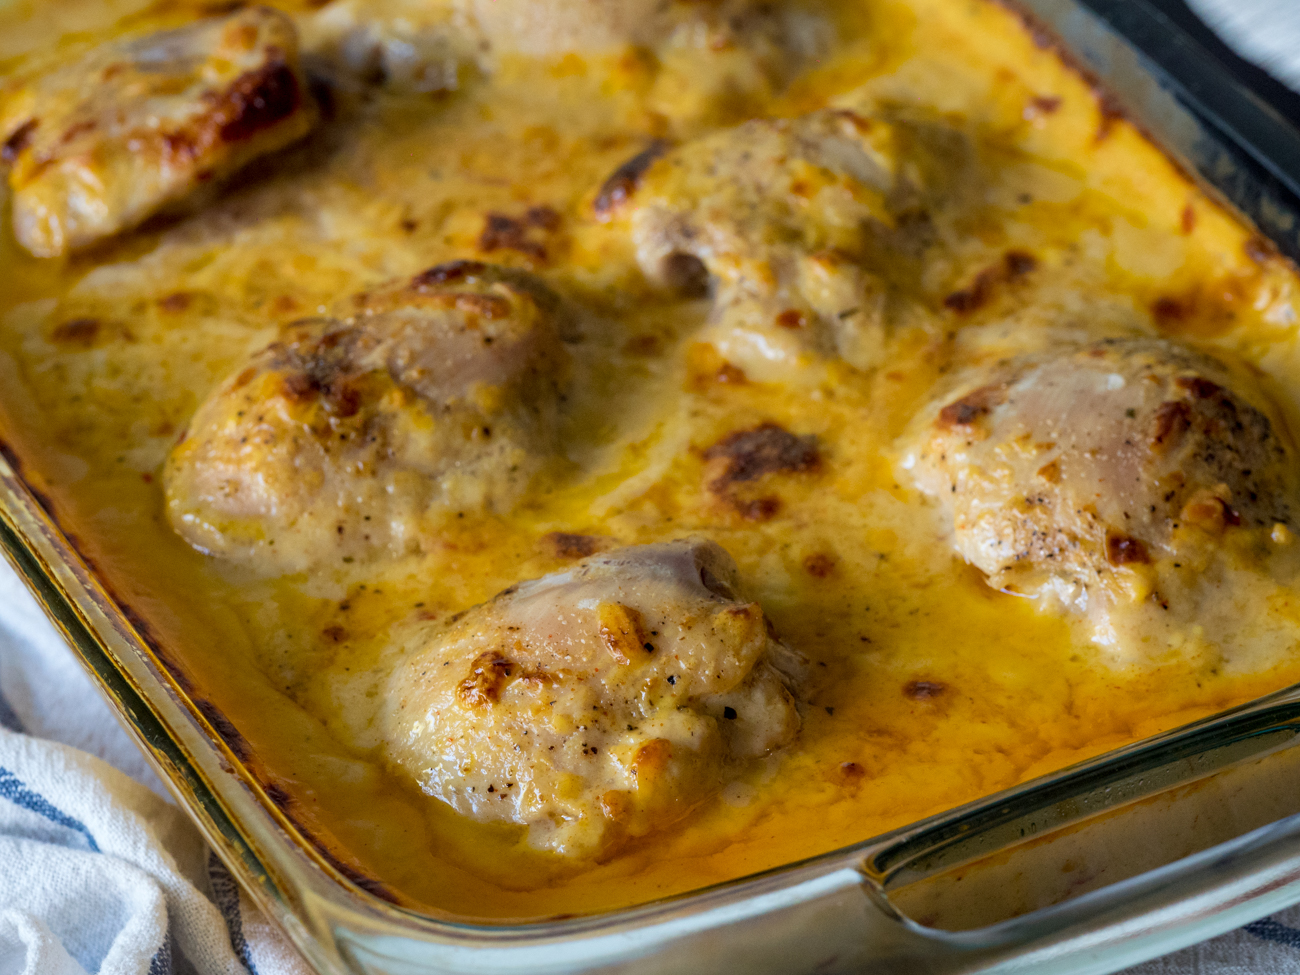 Creamy Southern Smothered Chicken